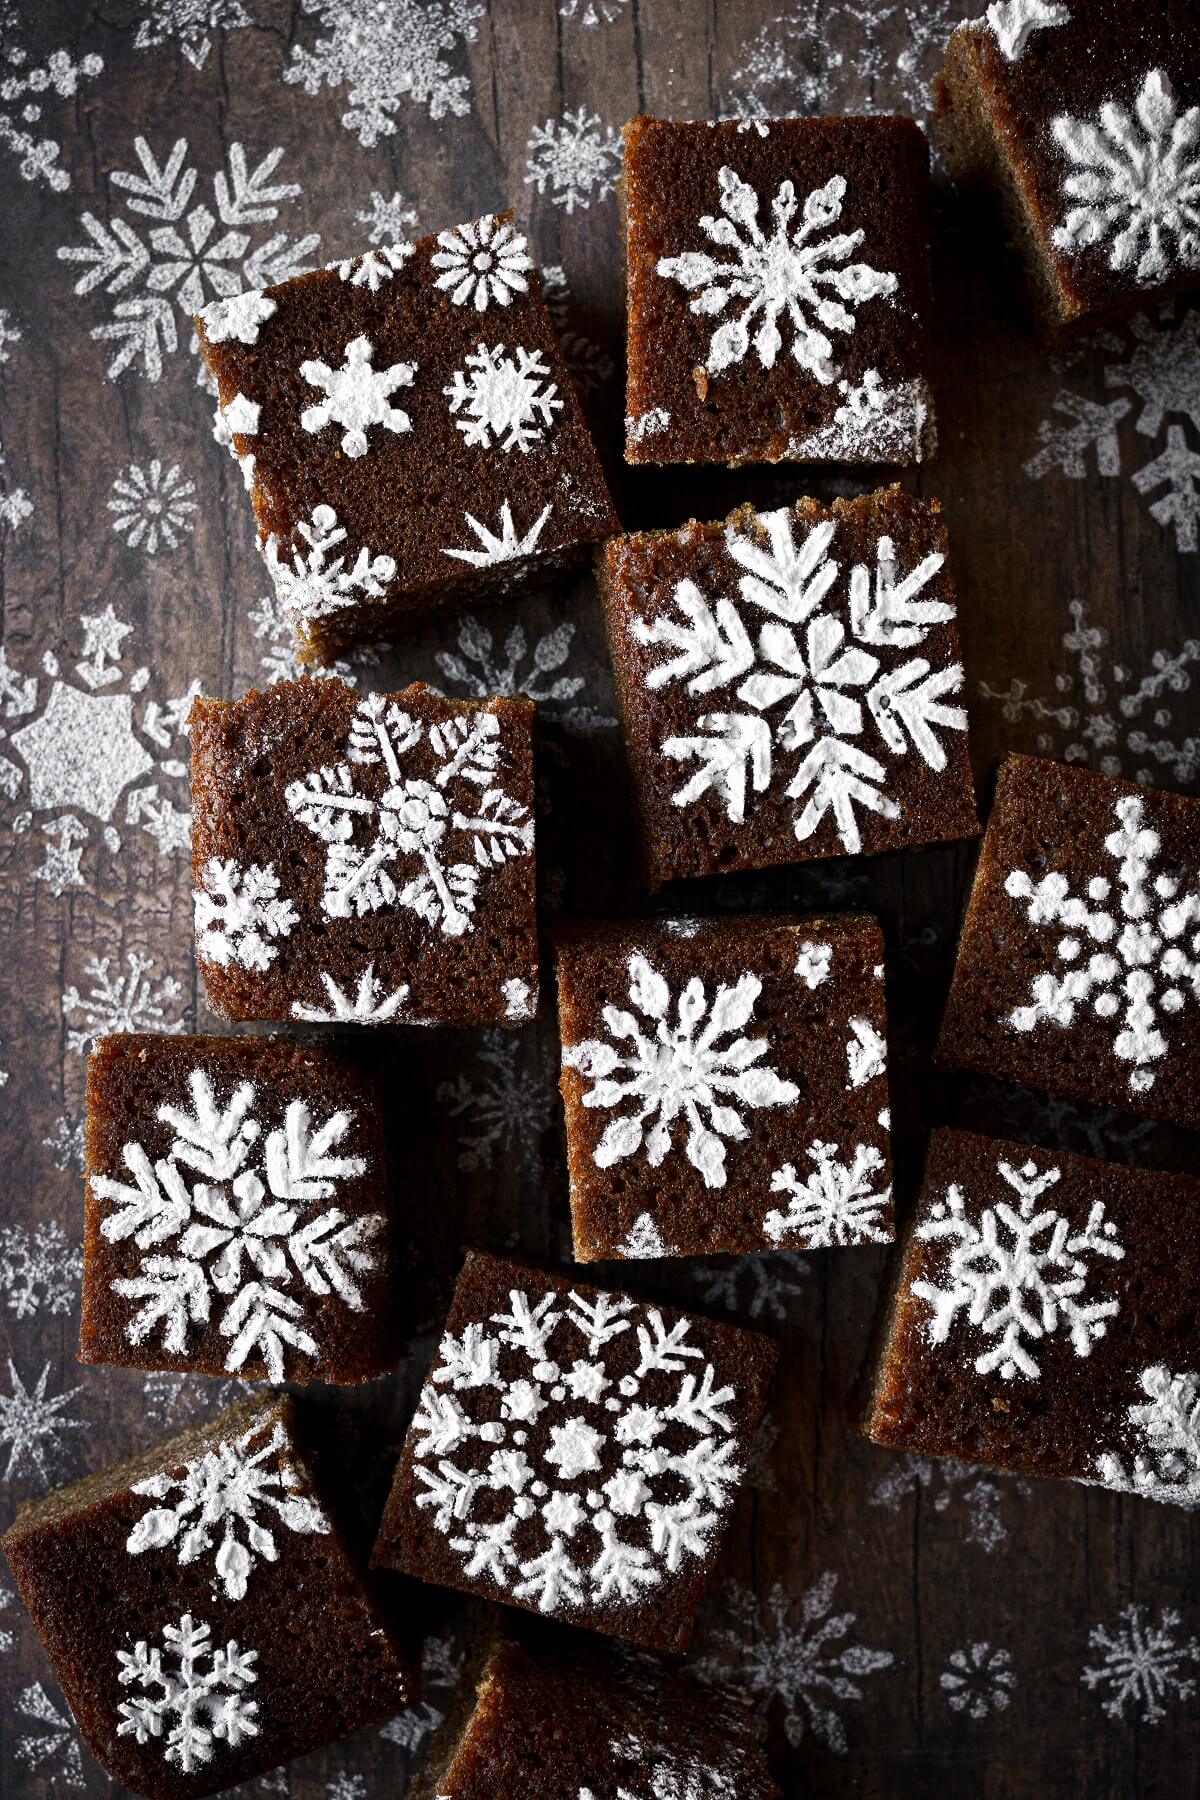 Gingerbread sheet cake cut into squares and decorated with powdered sugar snowflake stencils.